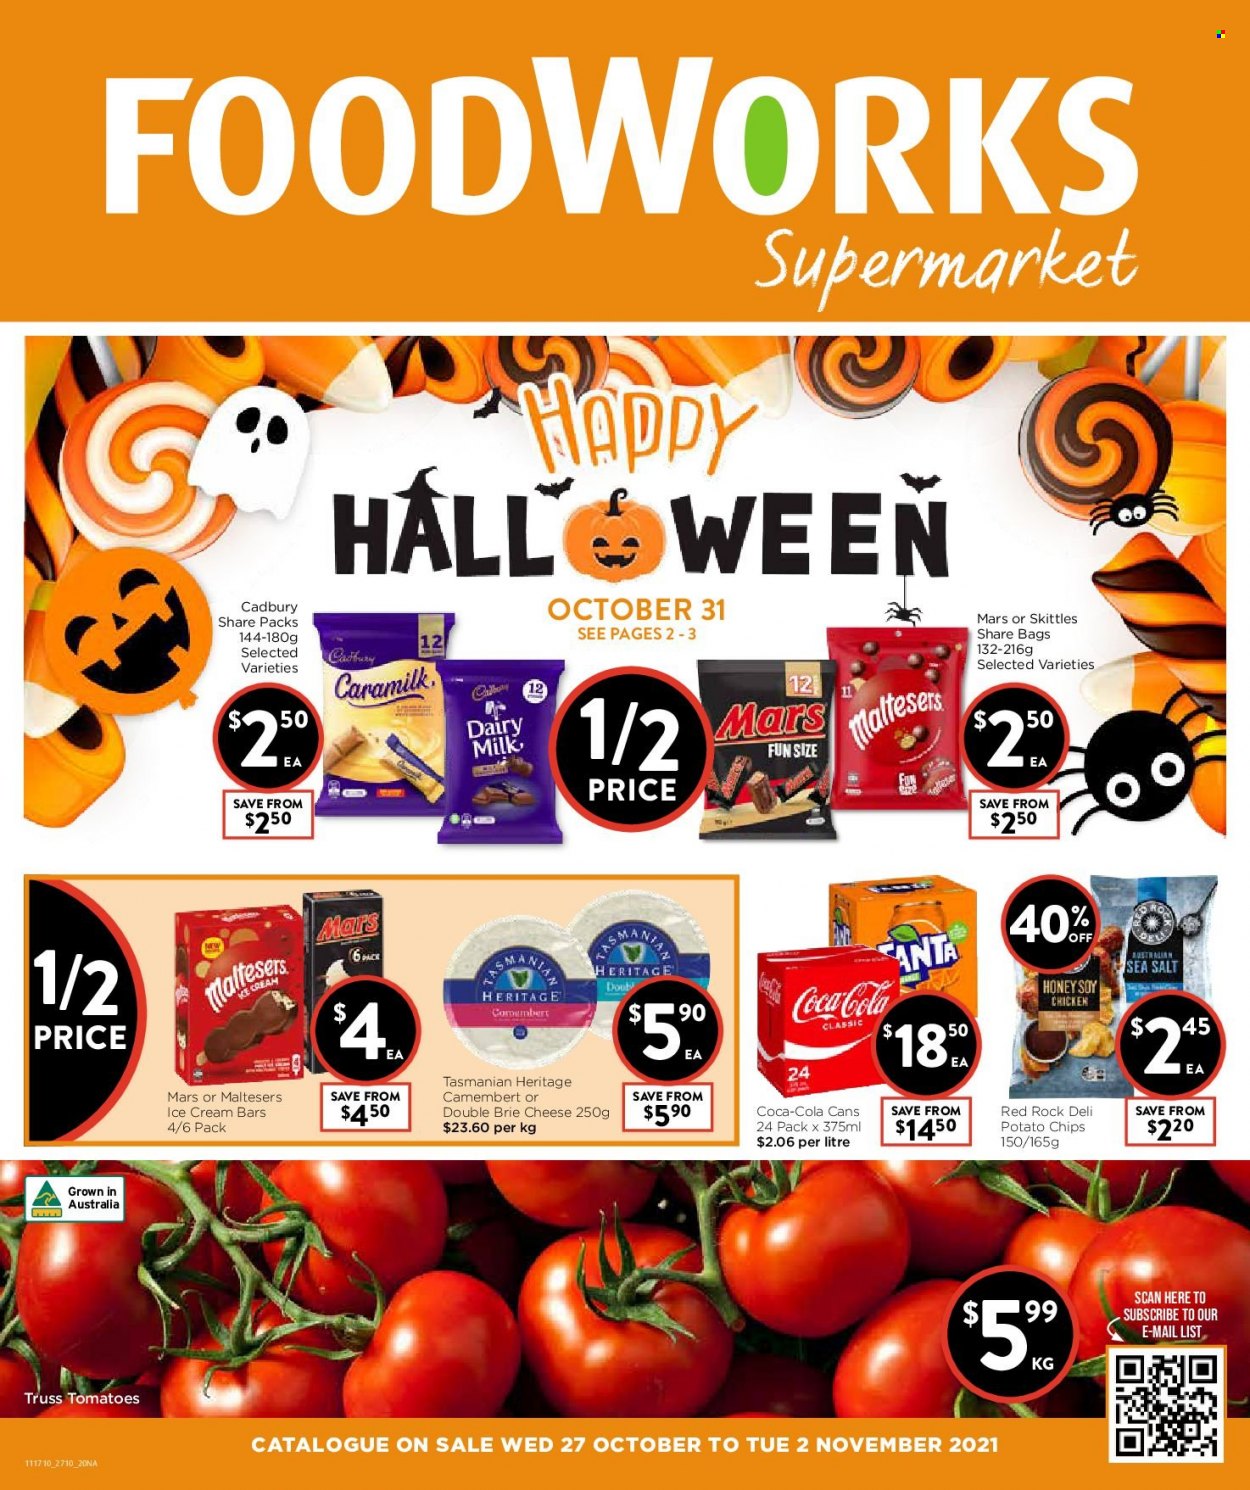 Foodworks catalogue - 27.10.2021 - 2.11.2021.